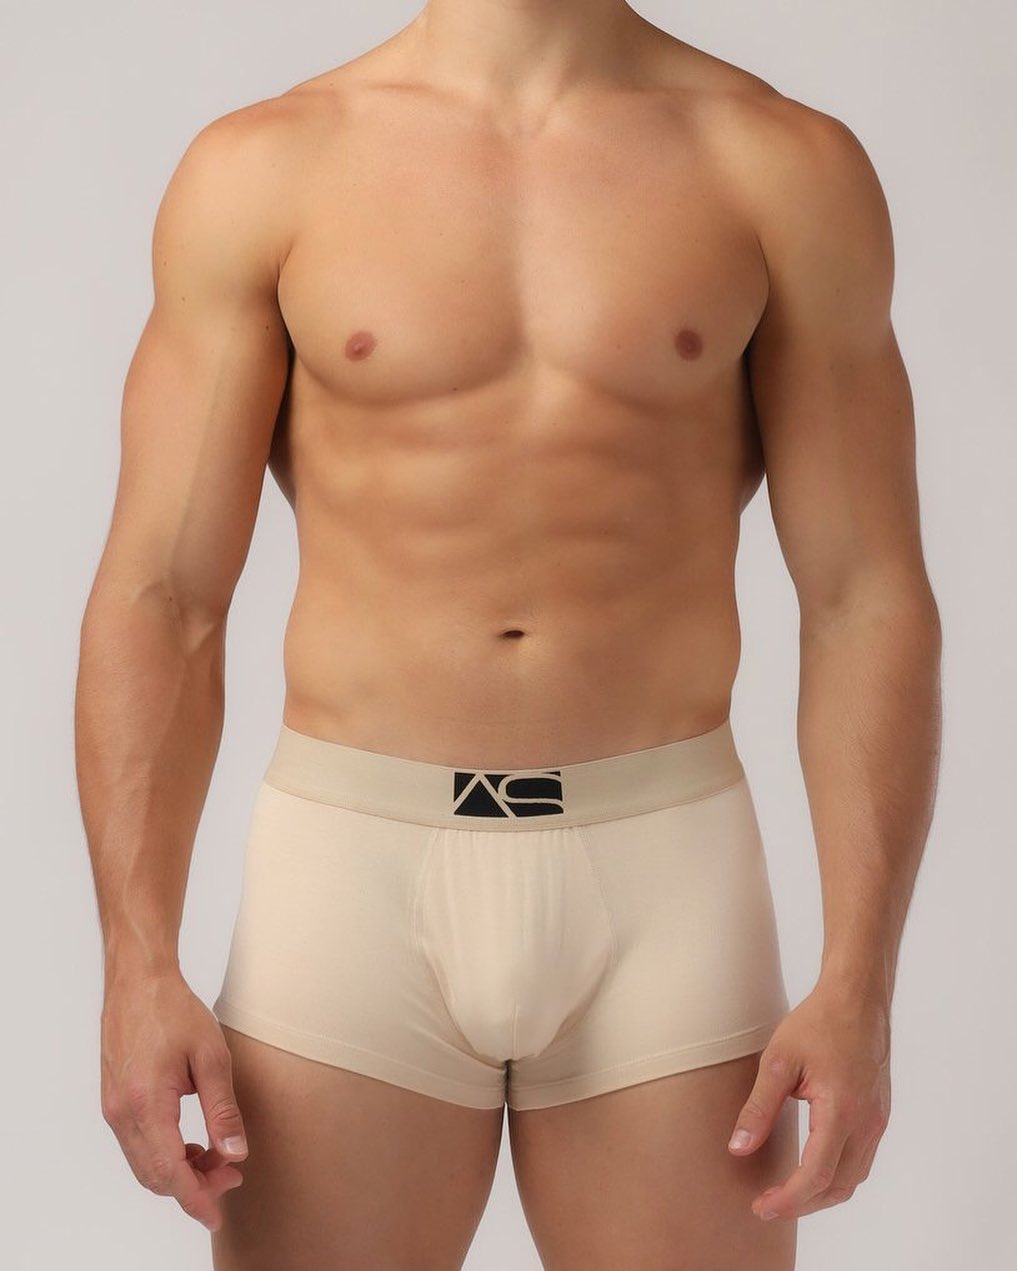 Our underwear suggestion today is the Adam Smith Boyshorts in beige made from a top quality micro modal fabric. Would you wear it?
_____
http://www.menandunderwear.com/2022/06/underwear-suggestion-adam-smith-boyshorts-beige.html